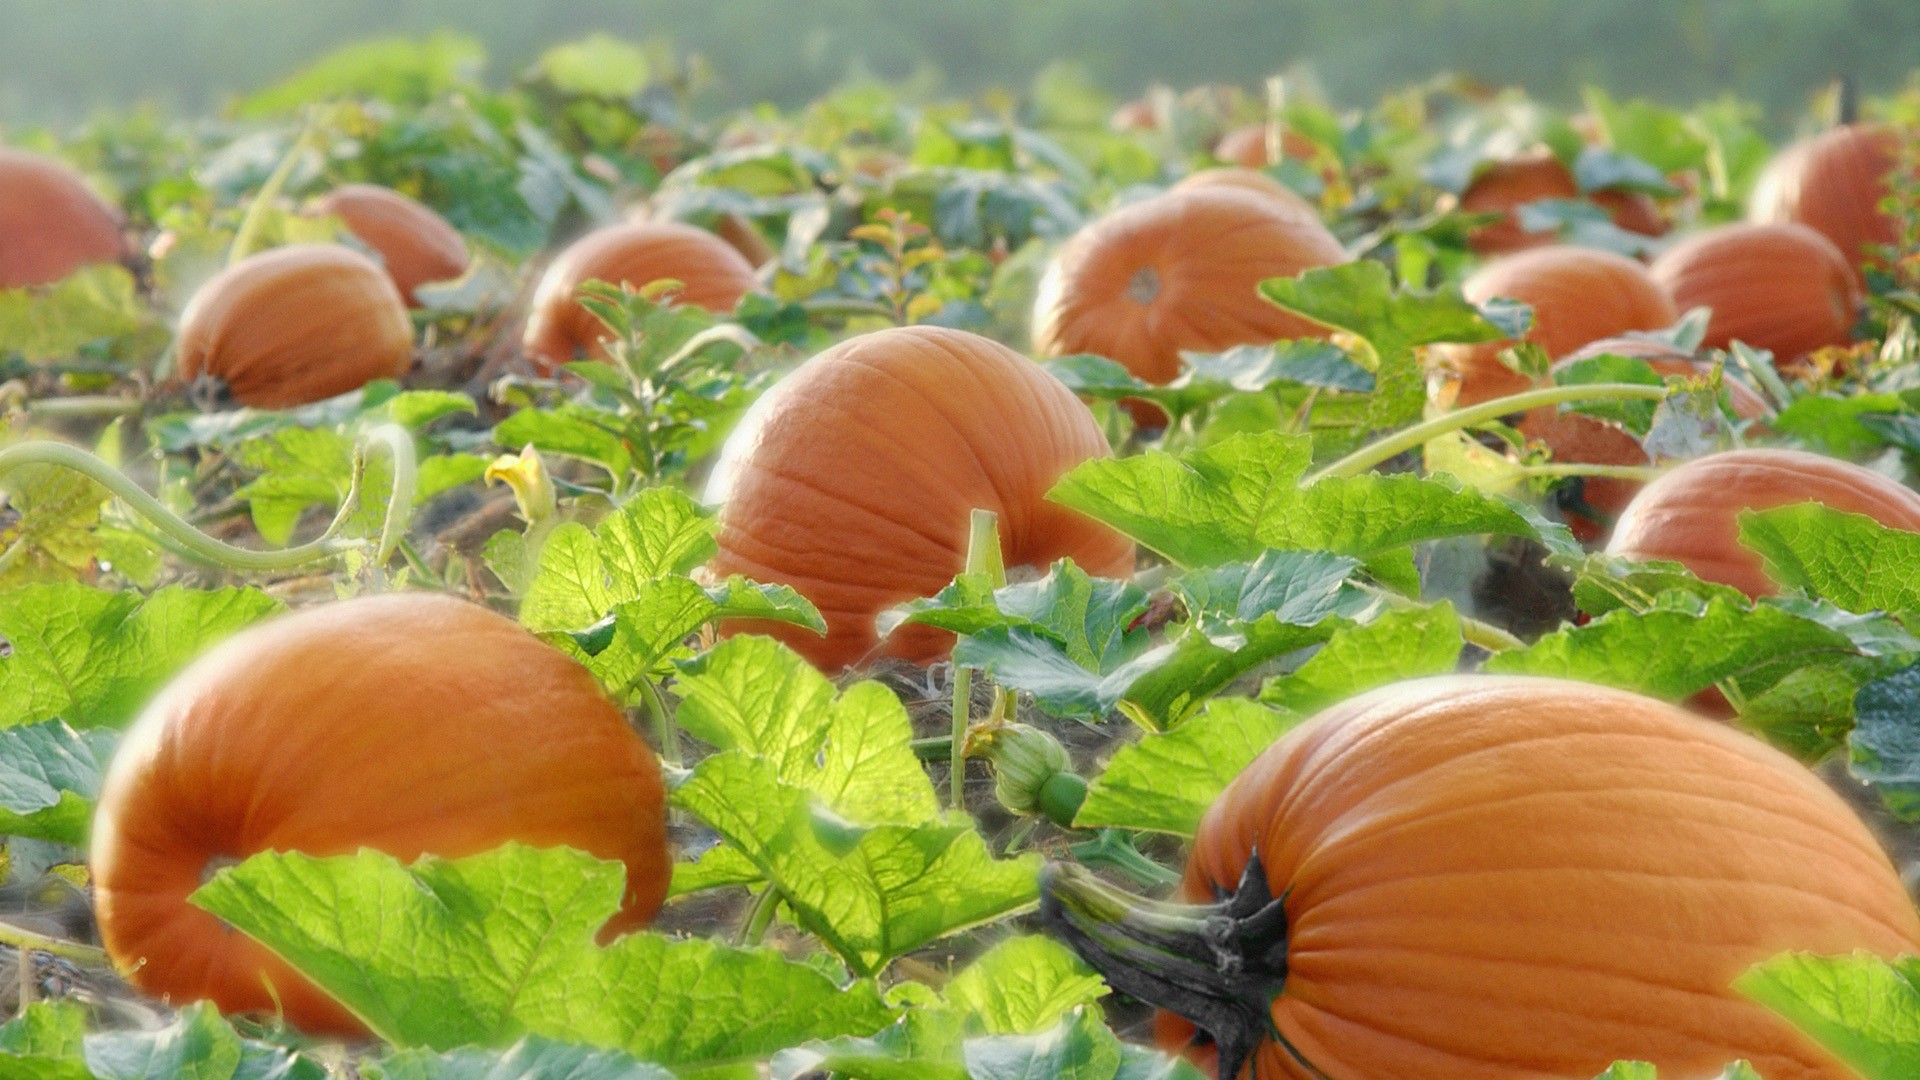 Pumpkin Ripens On The Field Wallpaper And Image